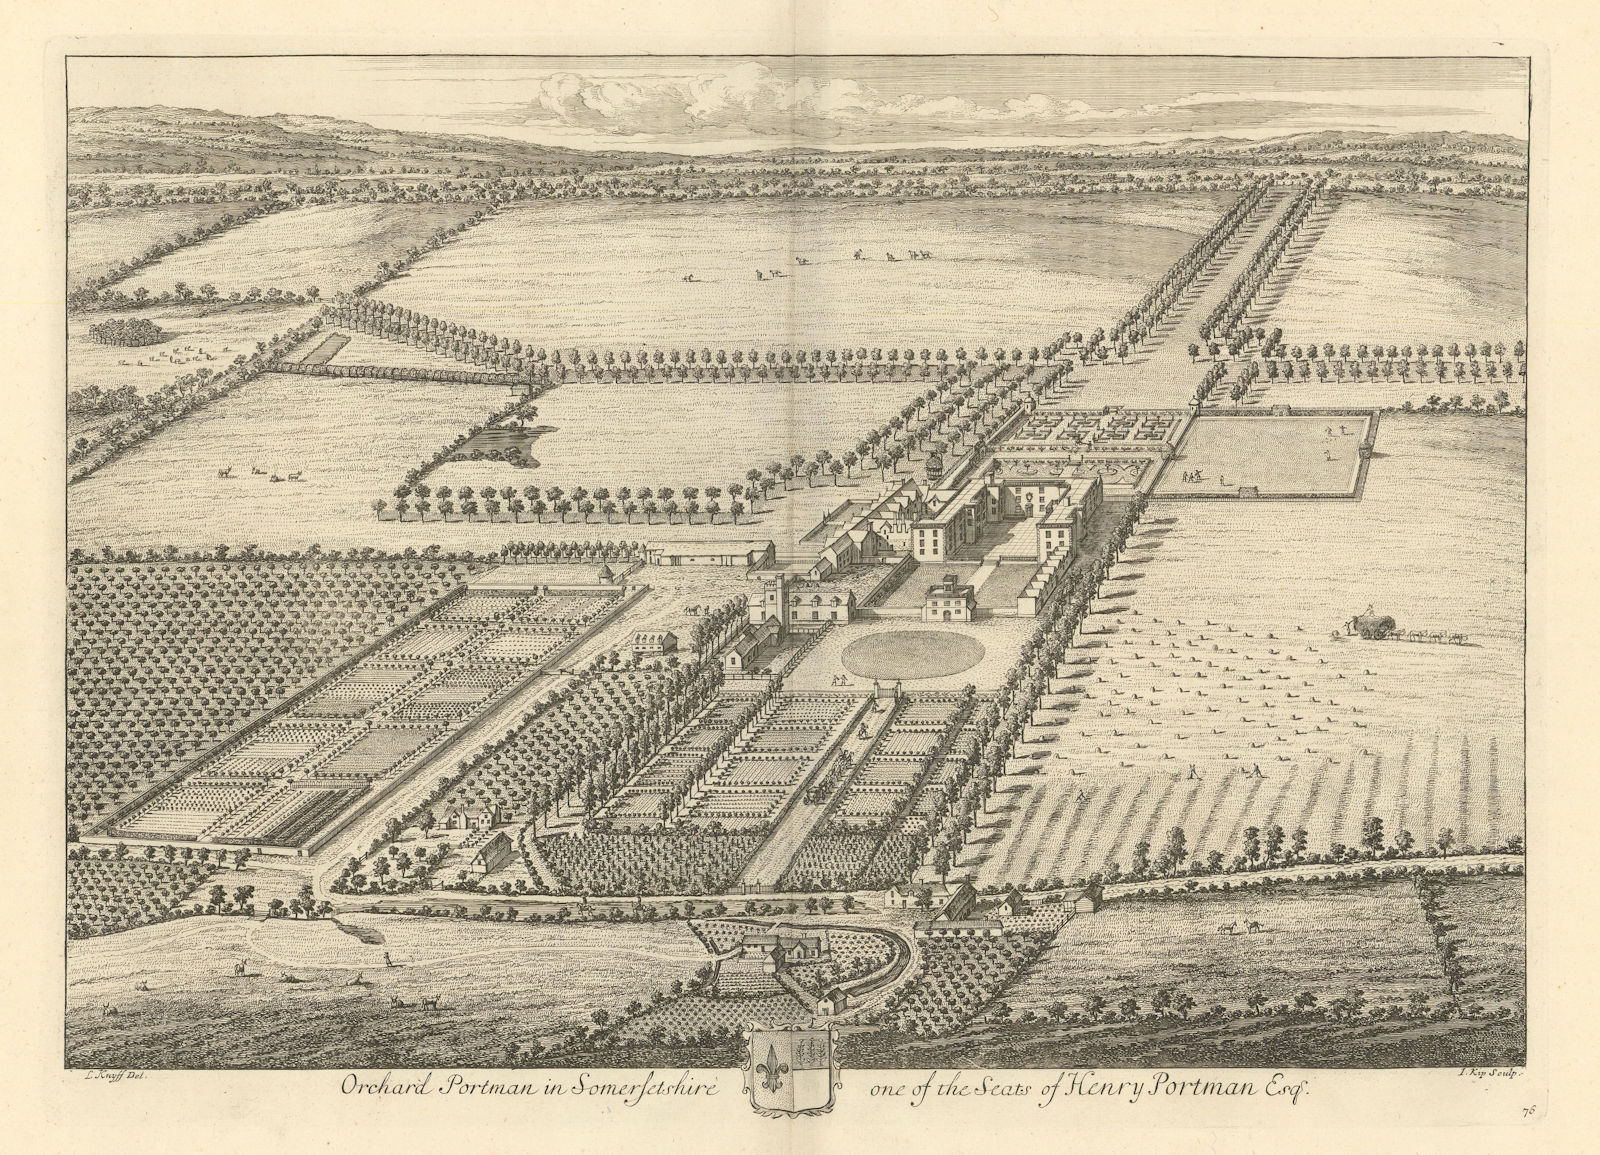 "Orchard Portman in Somersetshire" by Kip & Knyff. Now Taunton Racecourse 1709